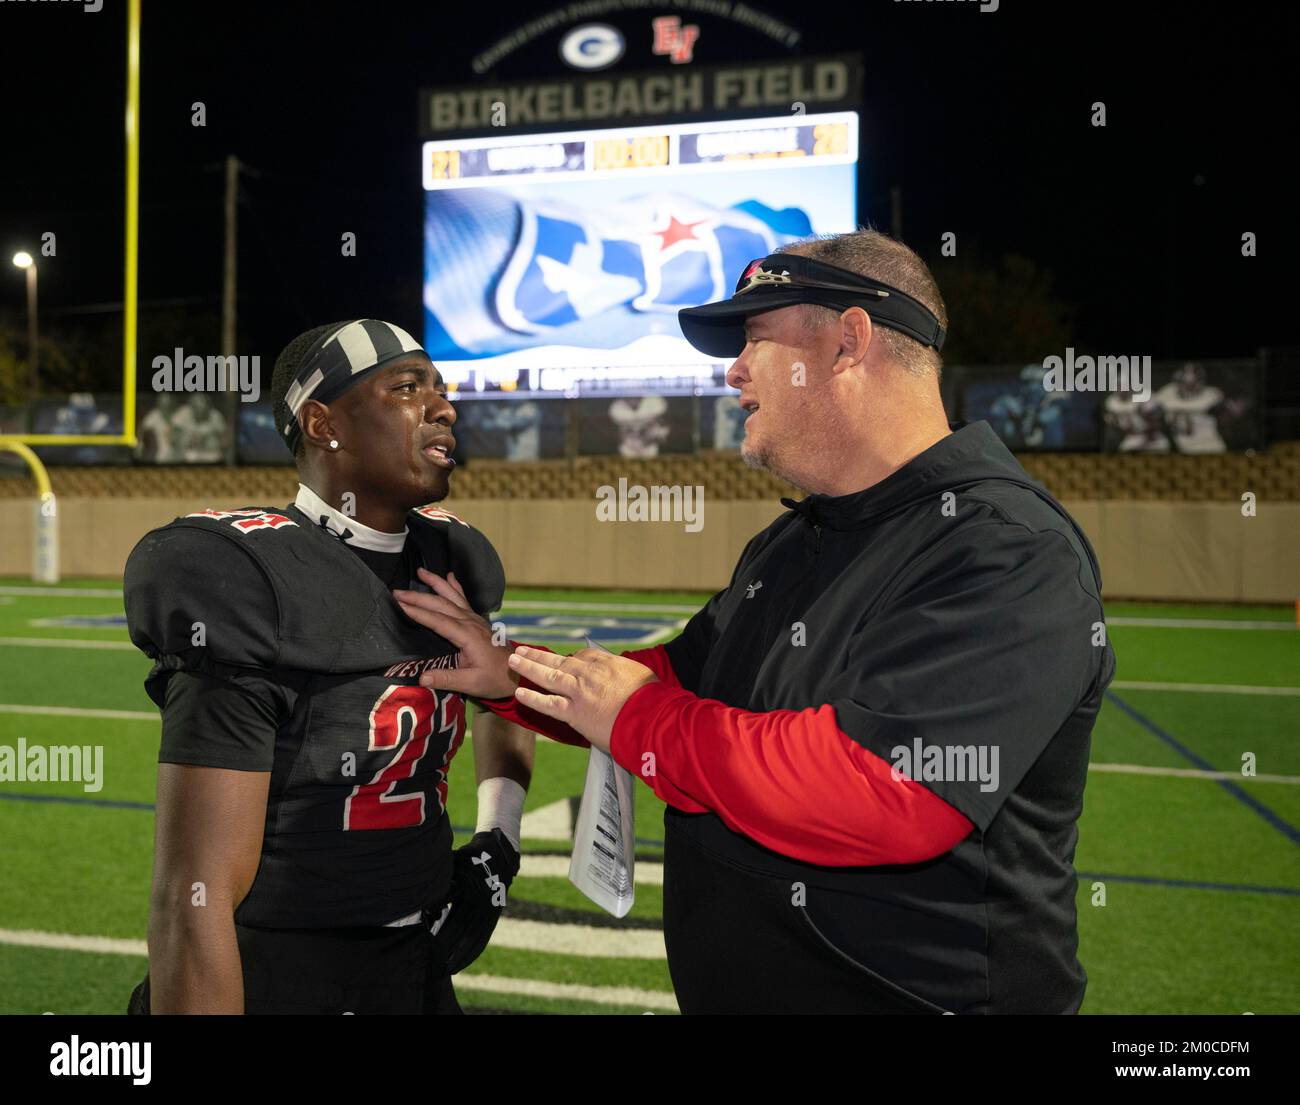 Georgetown Texas USA, December 3 2022: Coach comforts disappointed player after their team's loss in a University Scholastic League (UIL) quarter-final playoff football game in central Texas. ©Bob Daemmrich Stock Photo